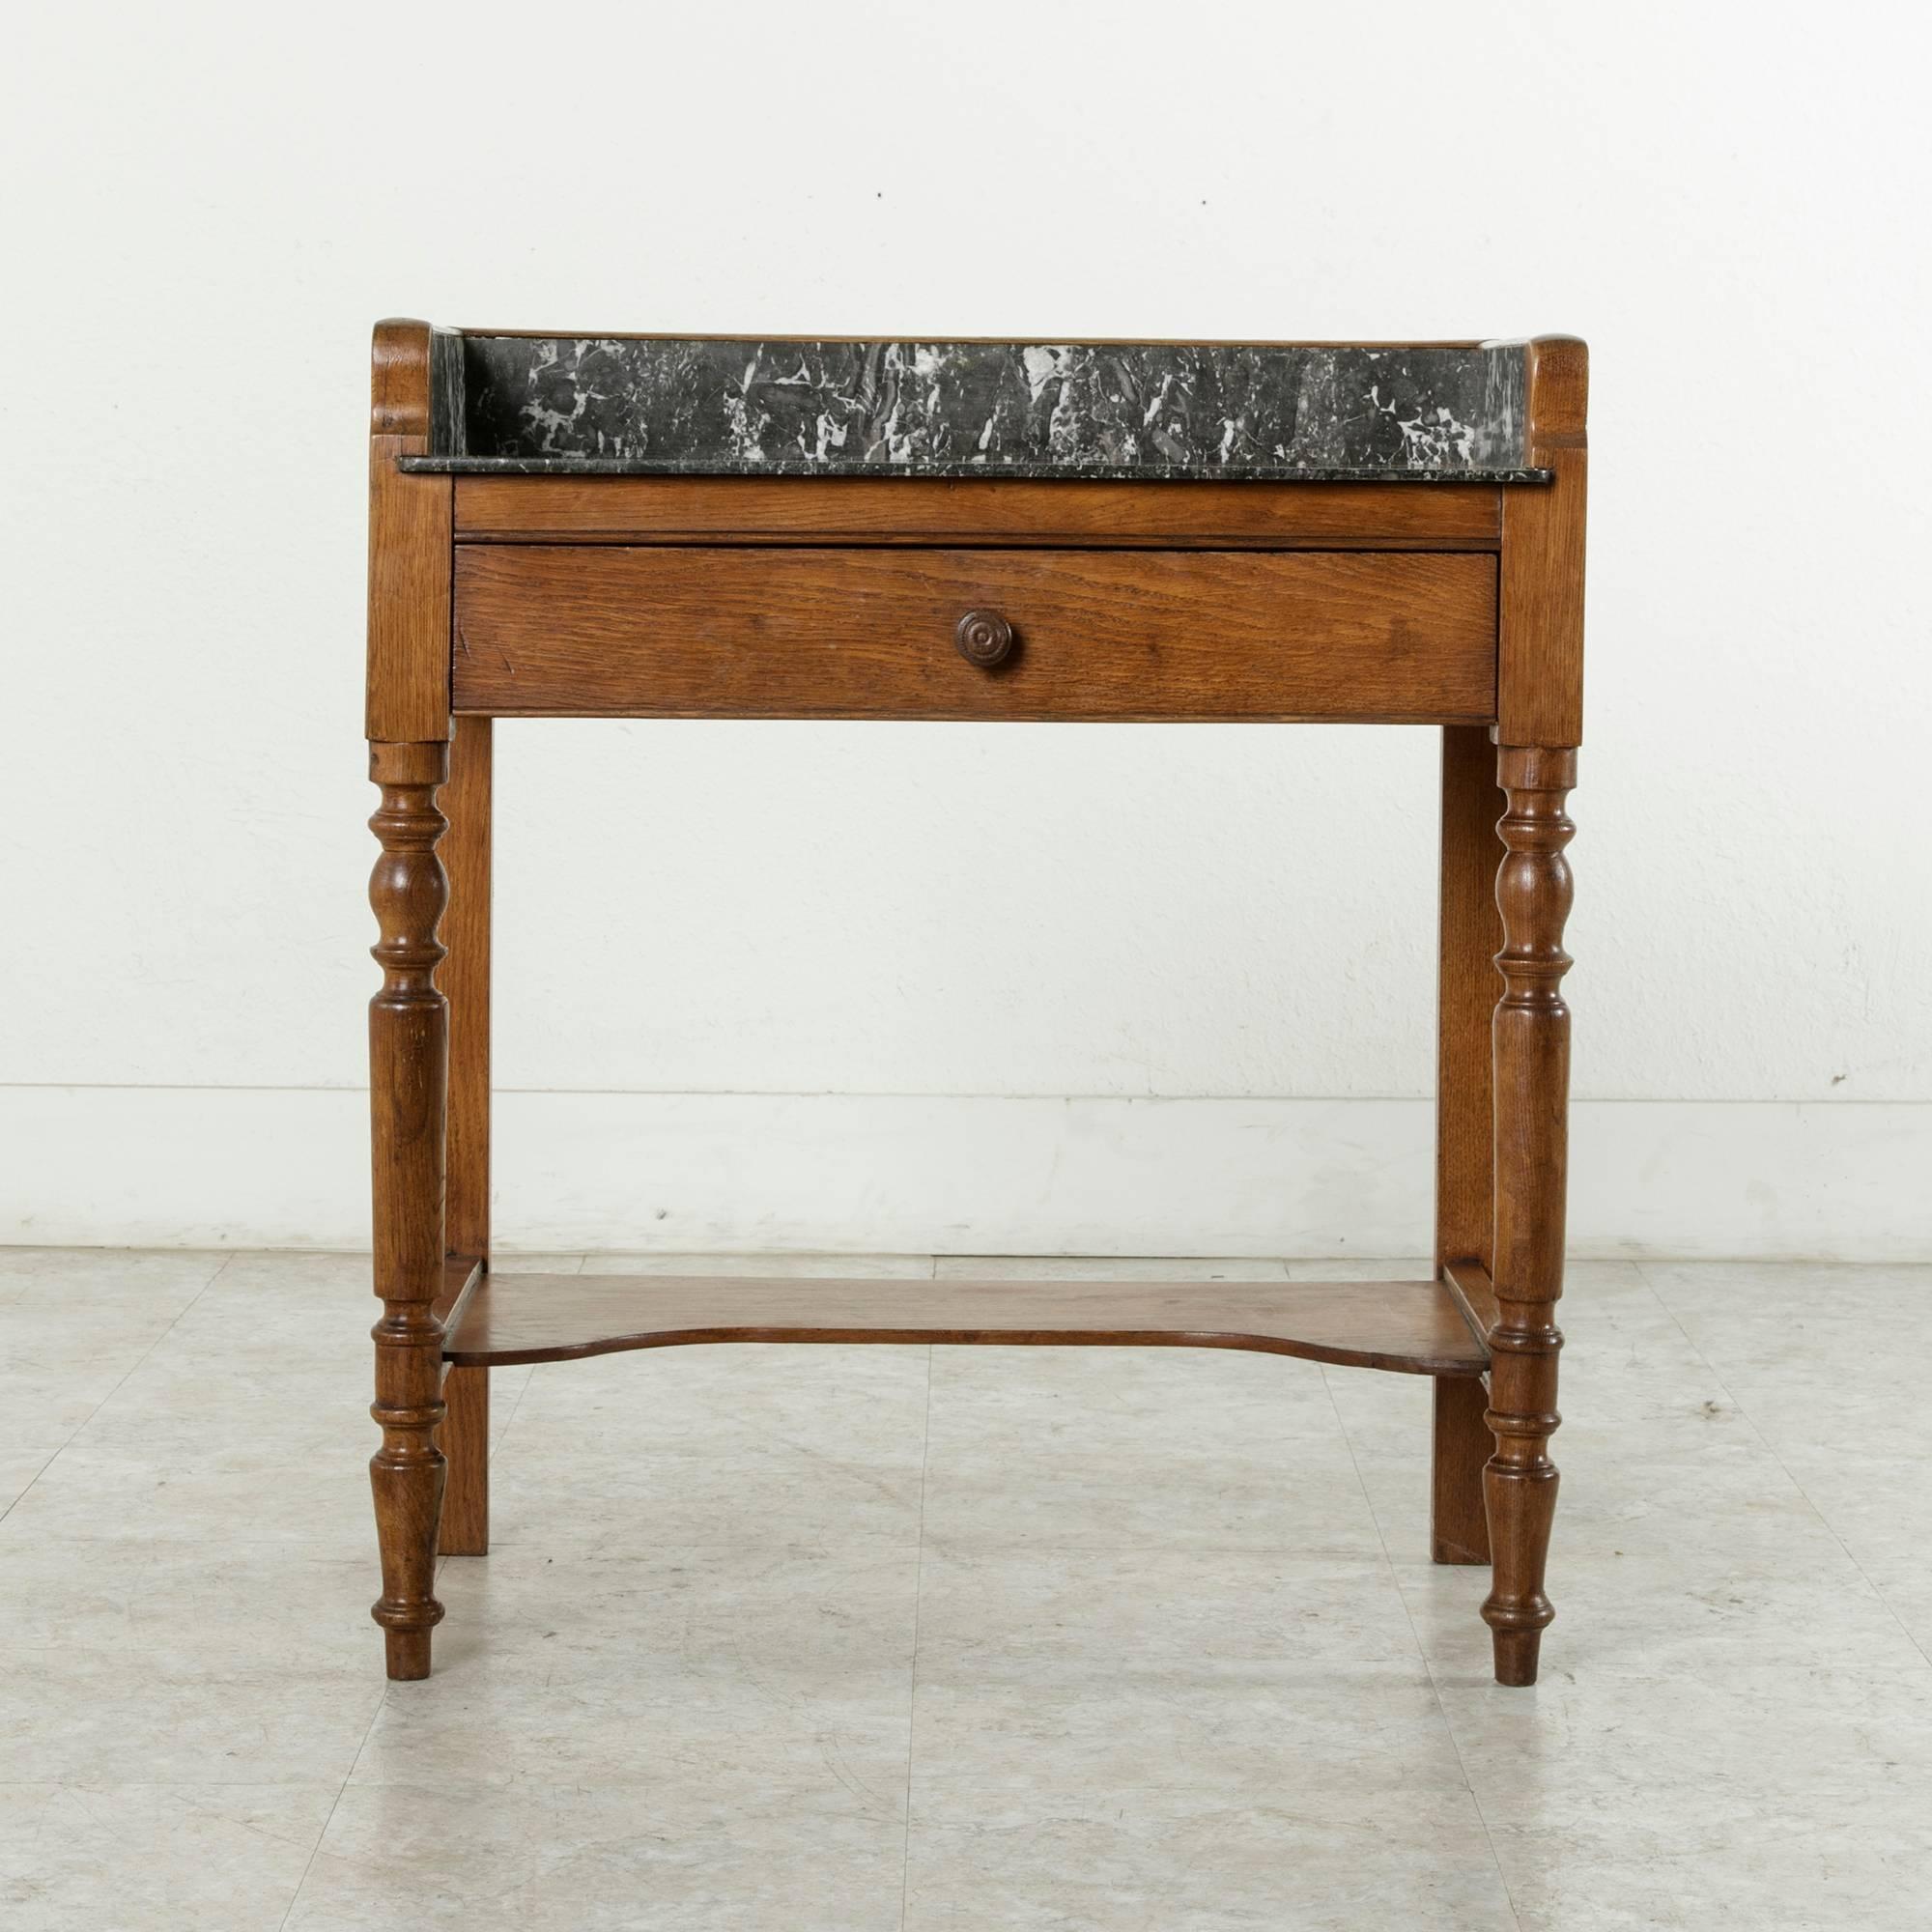 This late 19th century oak console table features a Saint Anne marble top and a marble surround on three sides. A single drawer of dovetail construction extends between the two turned legs in the front. A lower shelf provides extra stability as well